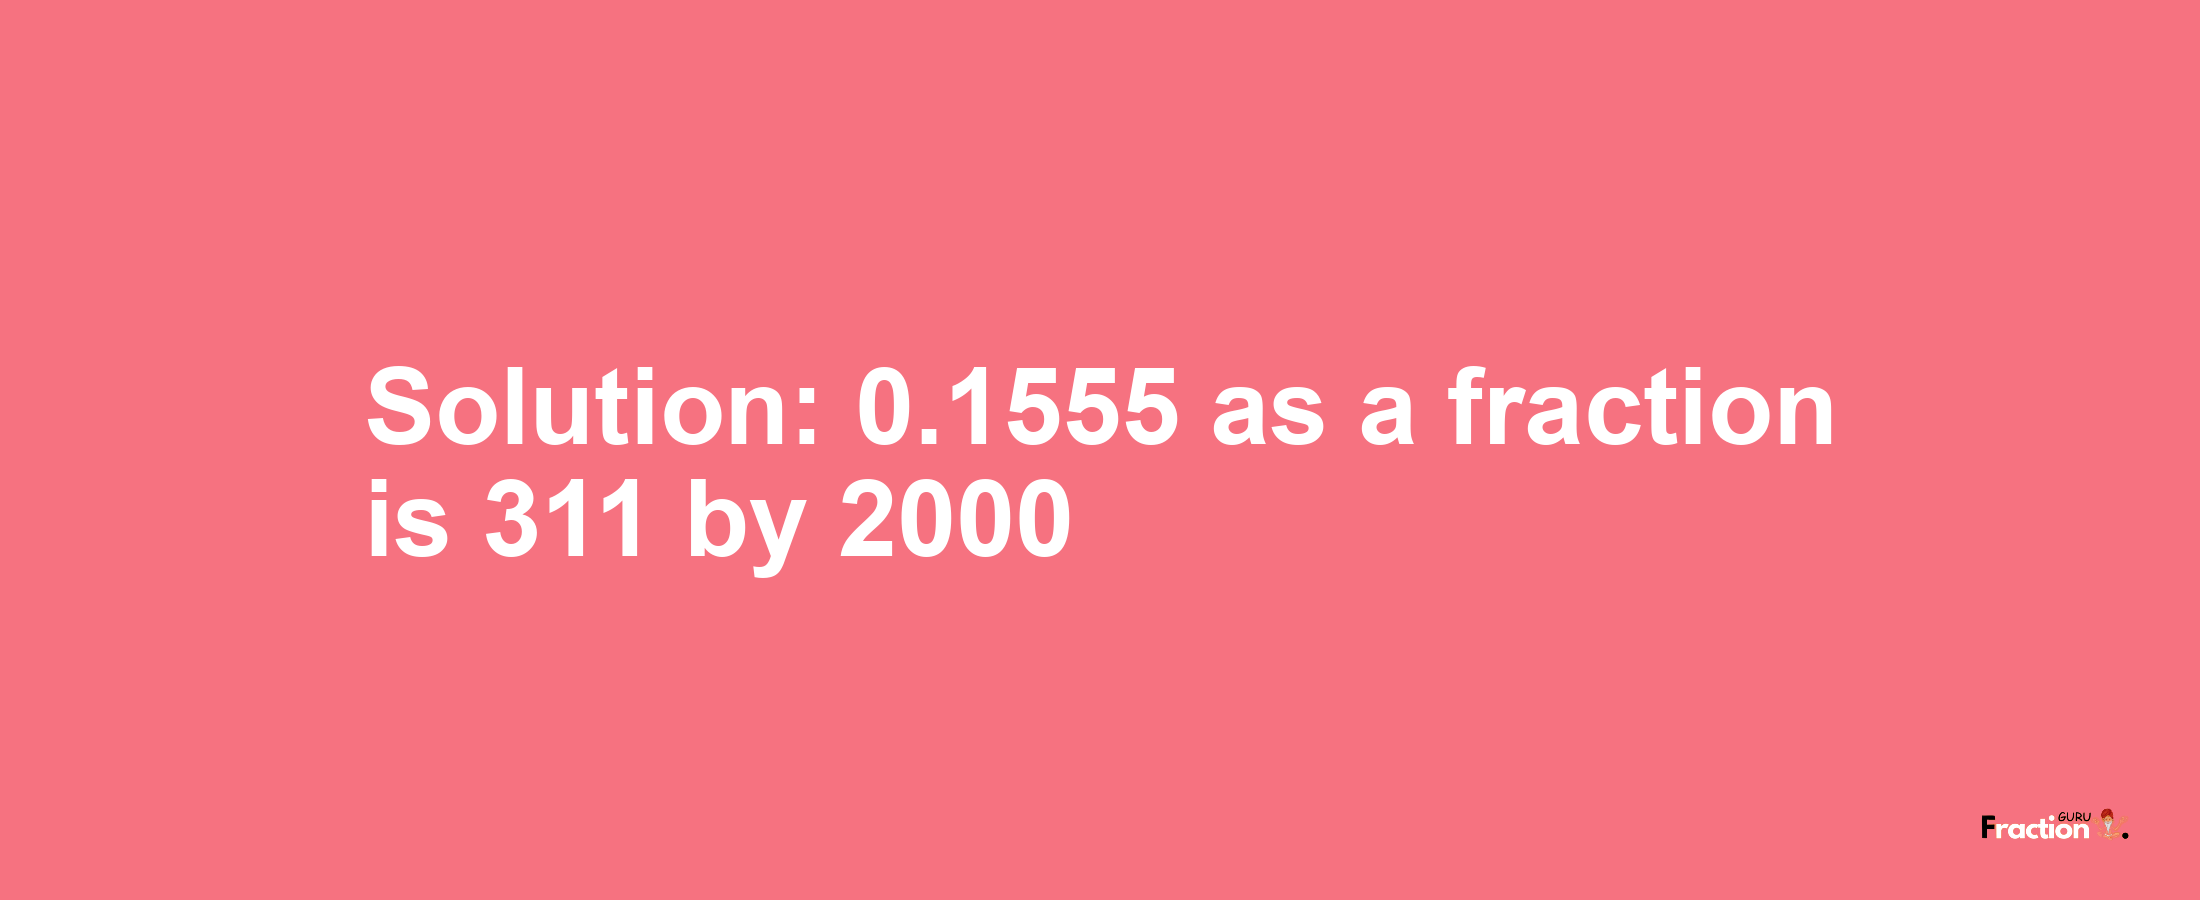 Solution:0.1555 as a fraction is 311/2000